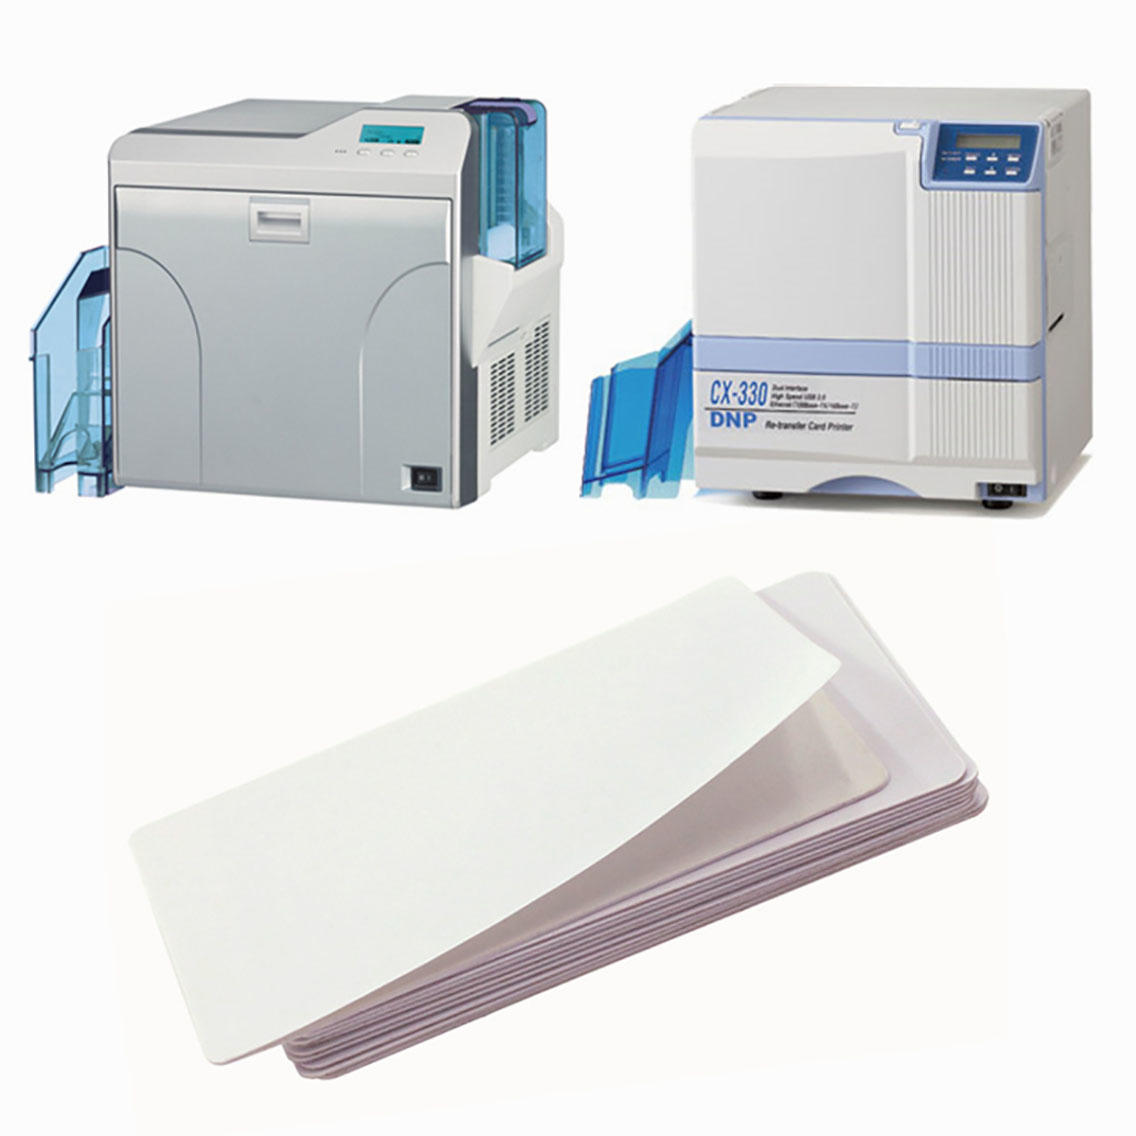 Cleanmo durable Dai Nippon IPA Cleaning Cards manufacturer for DNP CX-210, CX-320 & CX-330 Printers-2